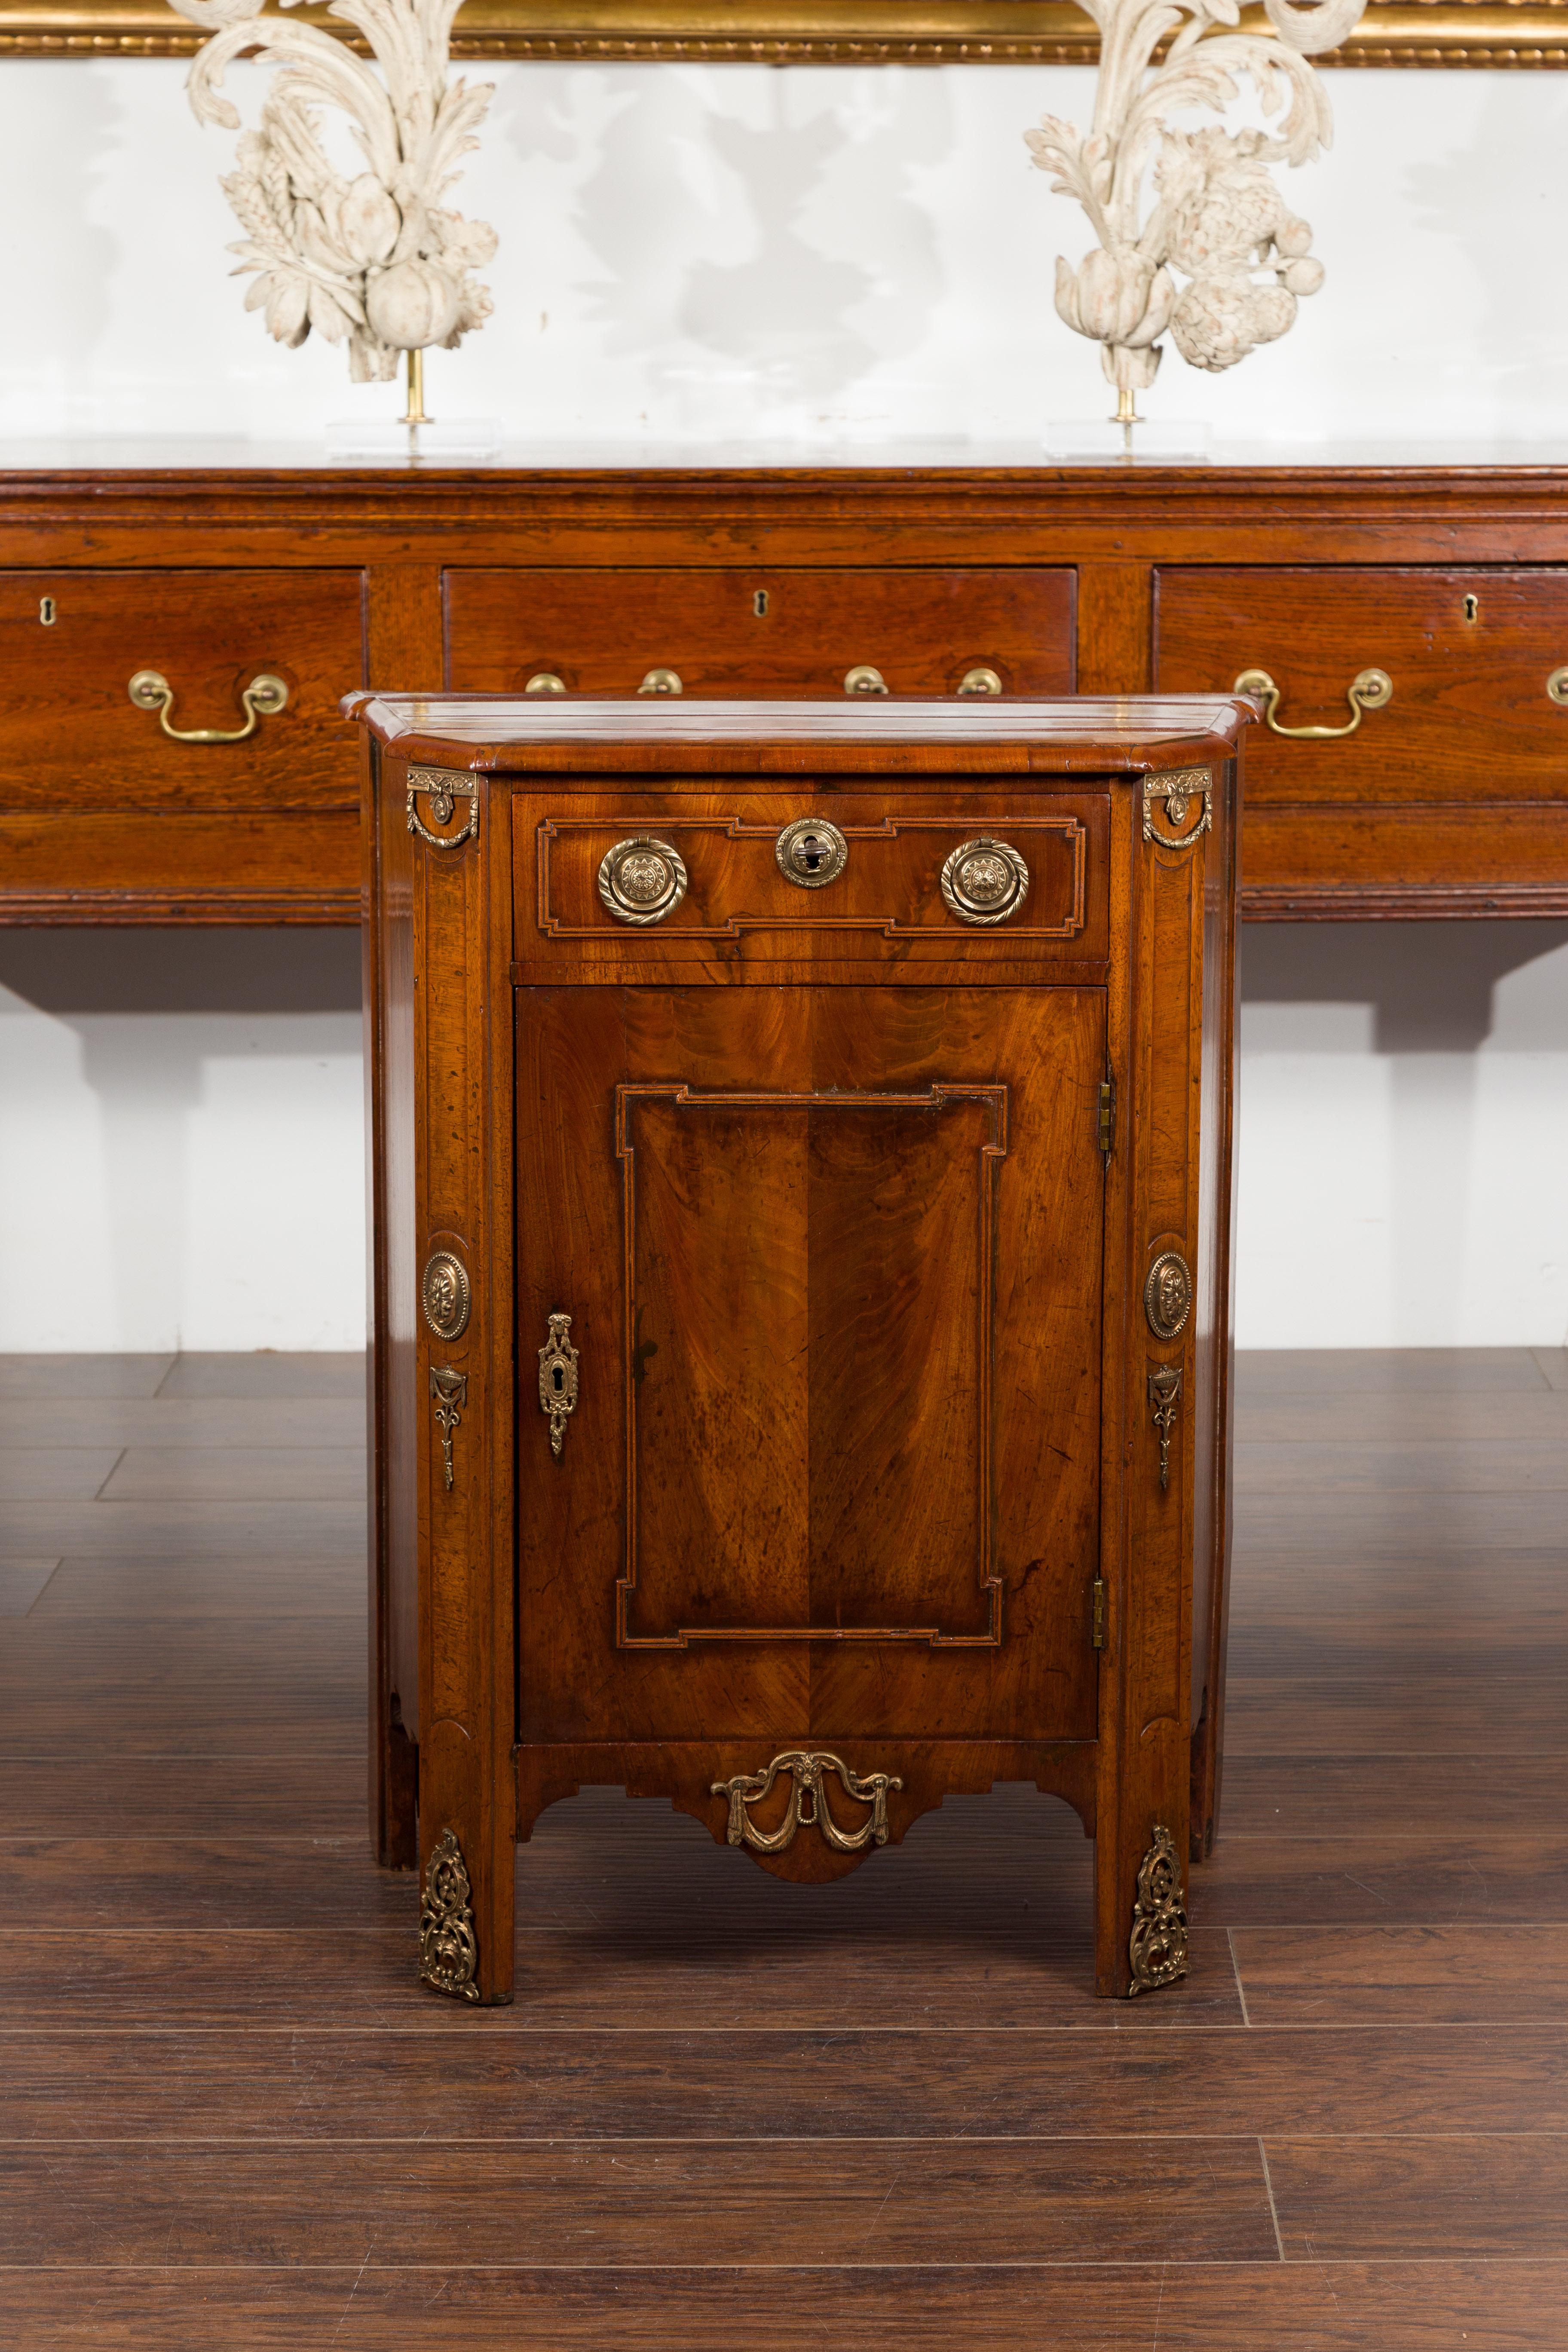 A petite Dutch walnut cabinet from the 19th century, with single drawer over door and bronze mounts. Created in the Netherlands during the 19th century, this walnut cabinet features a rectangular tapering veneered top sitting above a single drawer